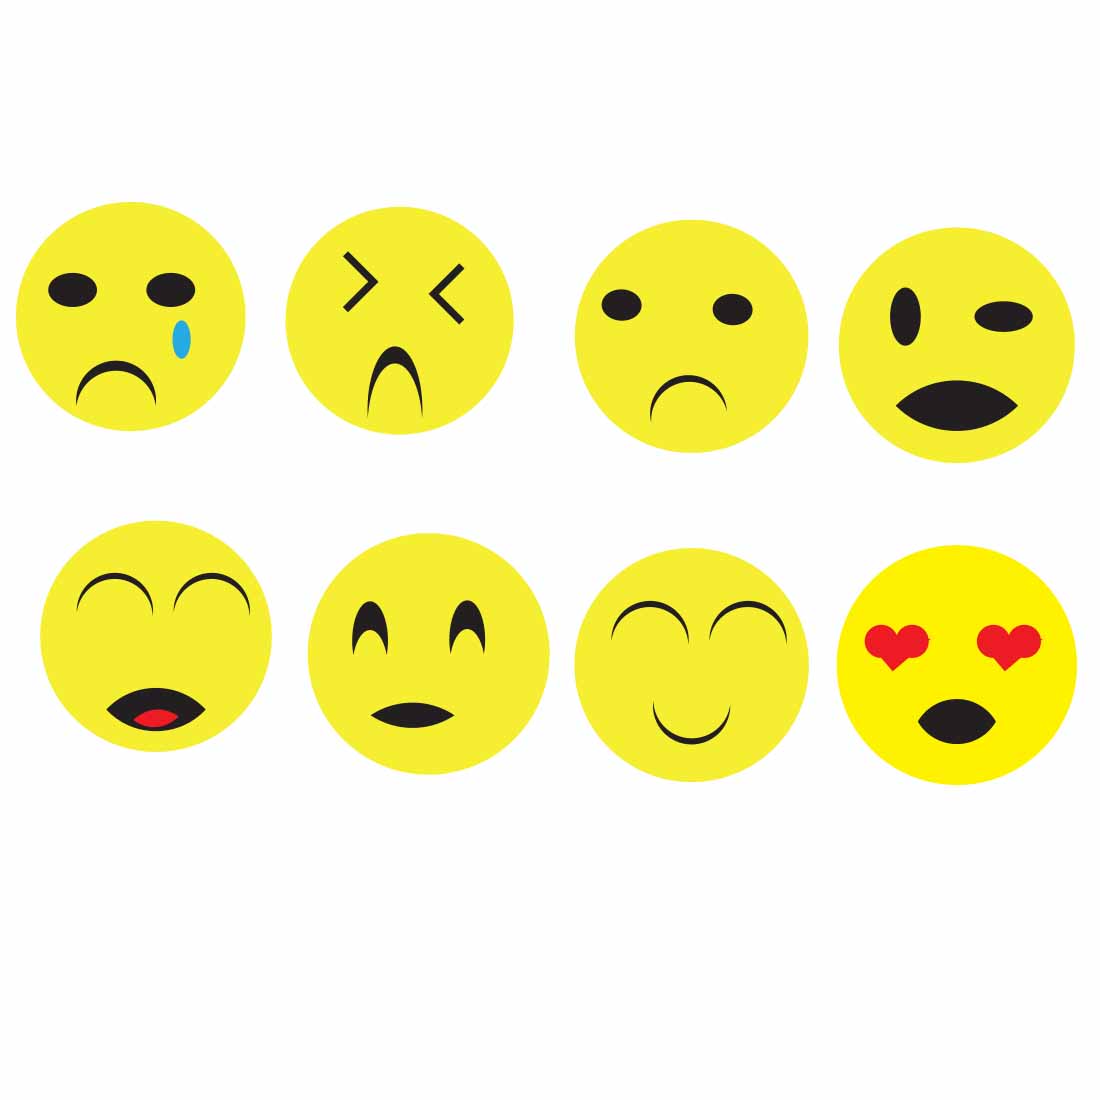 Set of nine emoticions with different expressions.